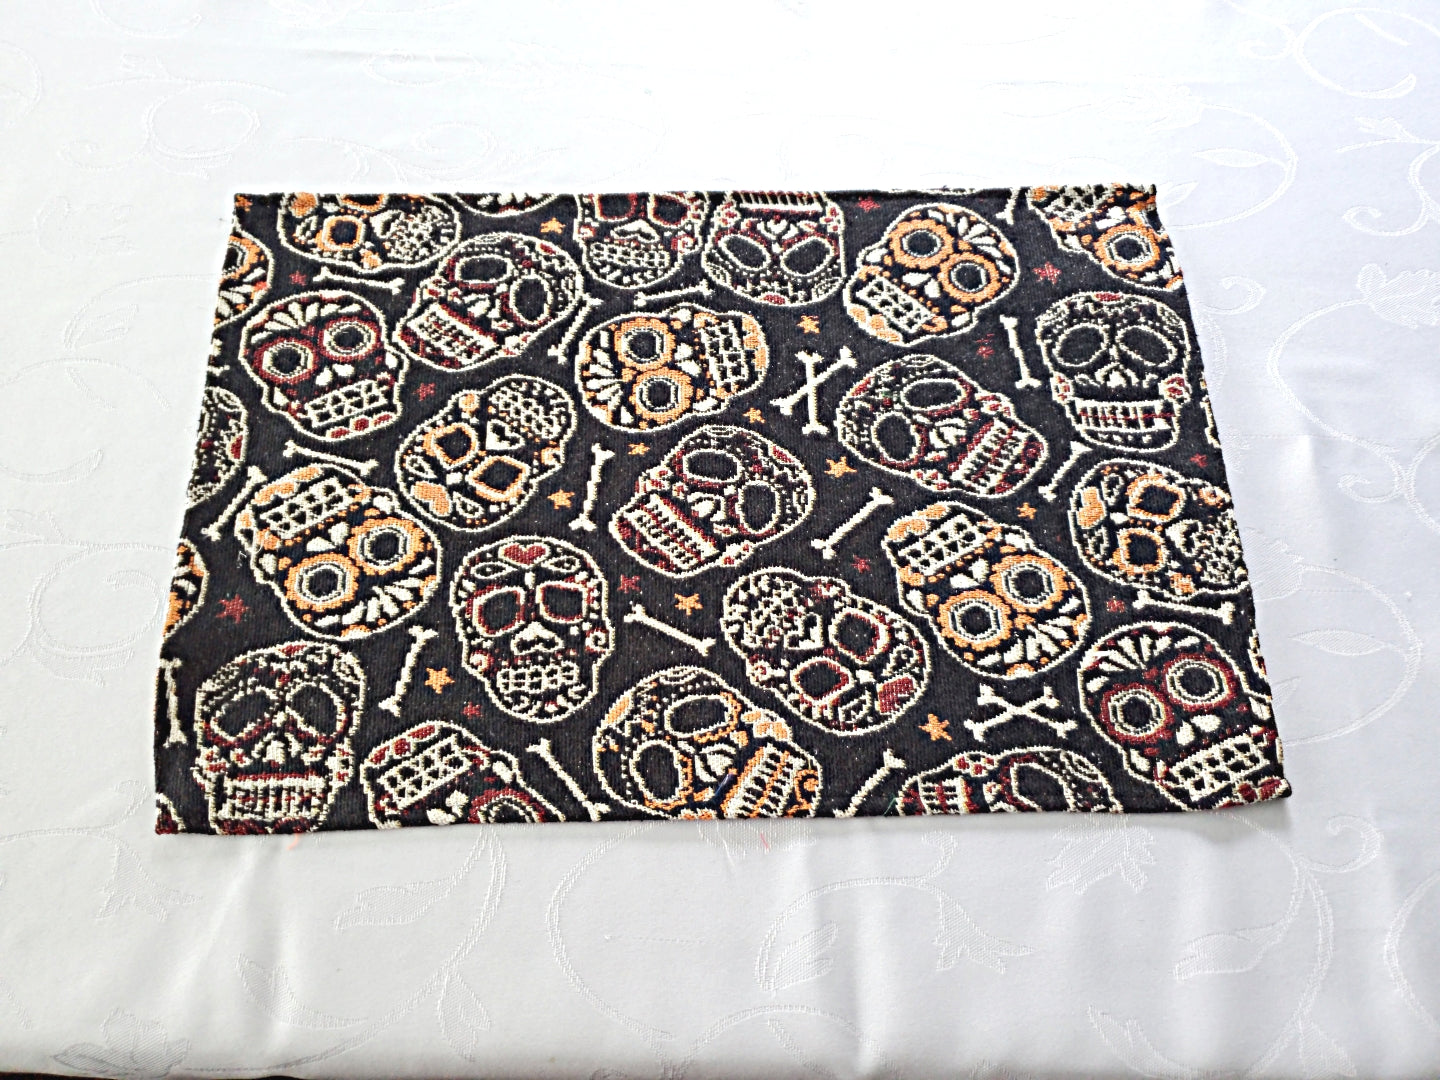 Halloween Skull and Bones Day of the Dead Tapestry Place Mats 13 in x 19 in – Set of 4